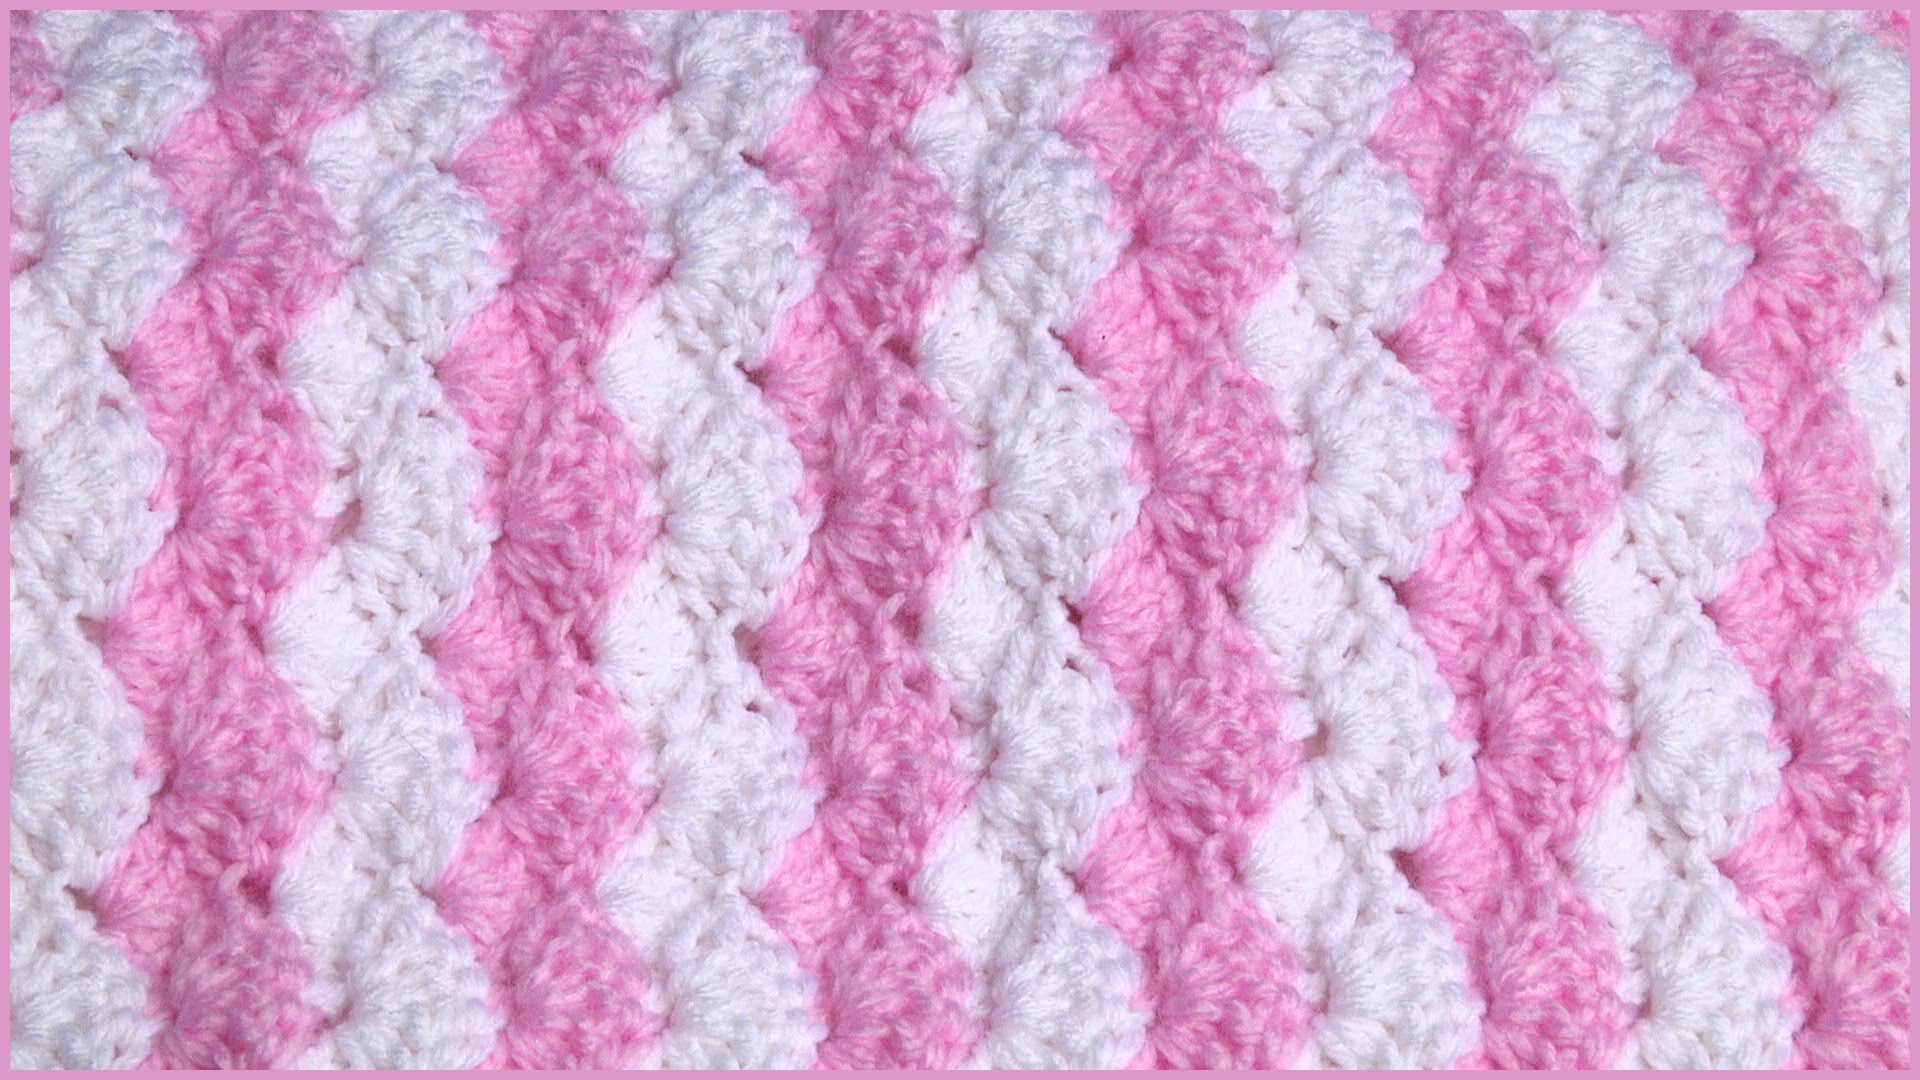 Crochet Pattern For Baby Blanket Video Tutorial Learn How To Make A Wavy Ba Blanket Using The